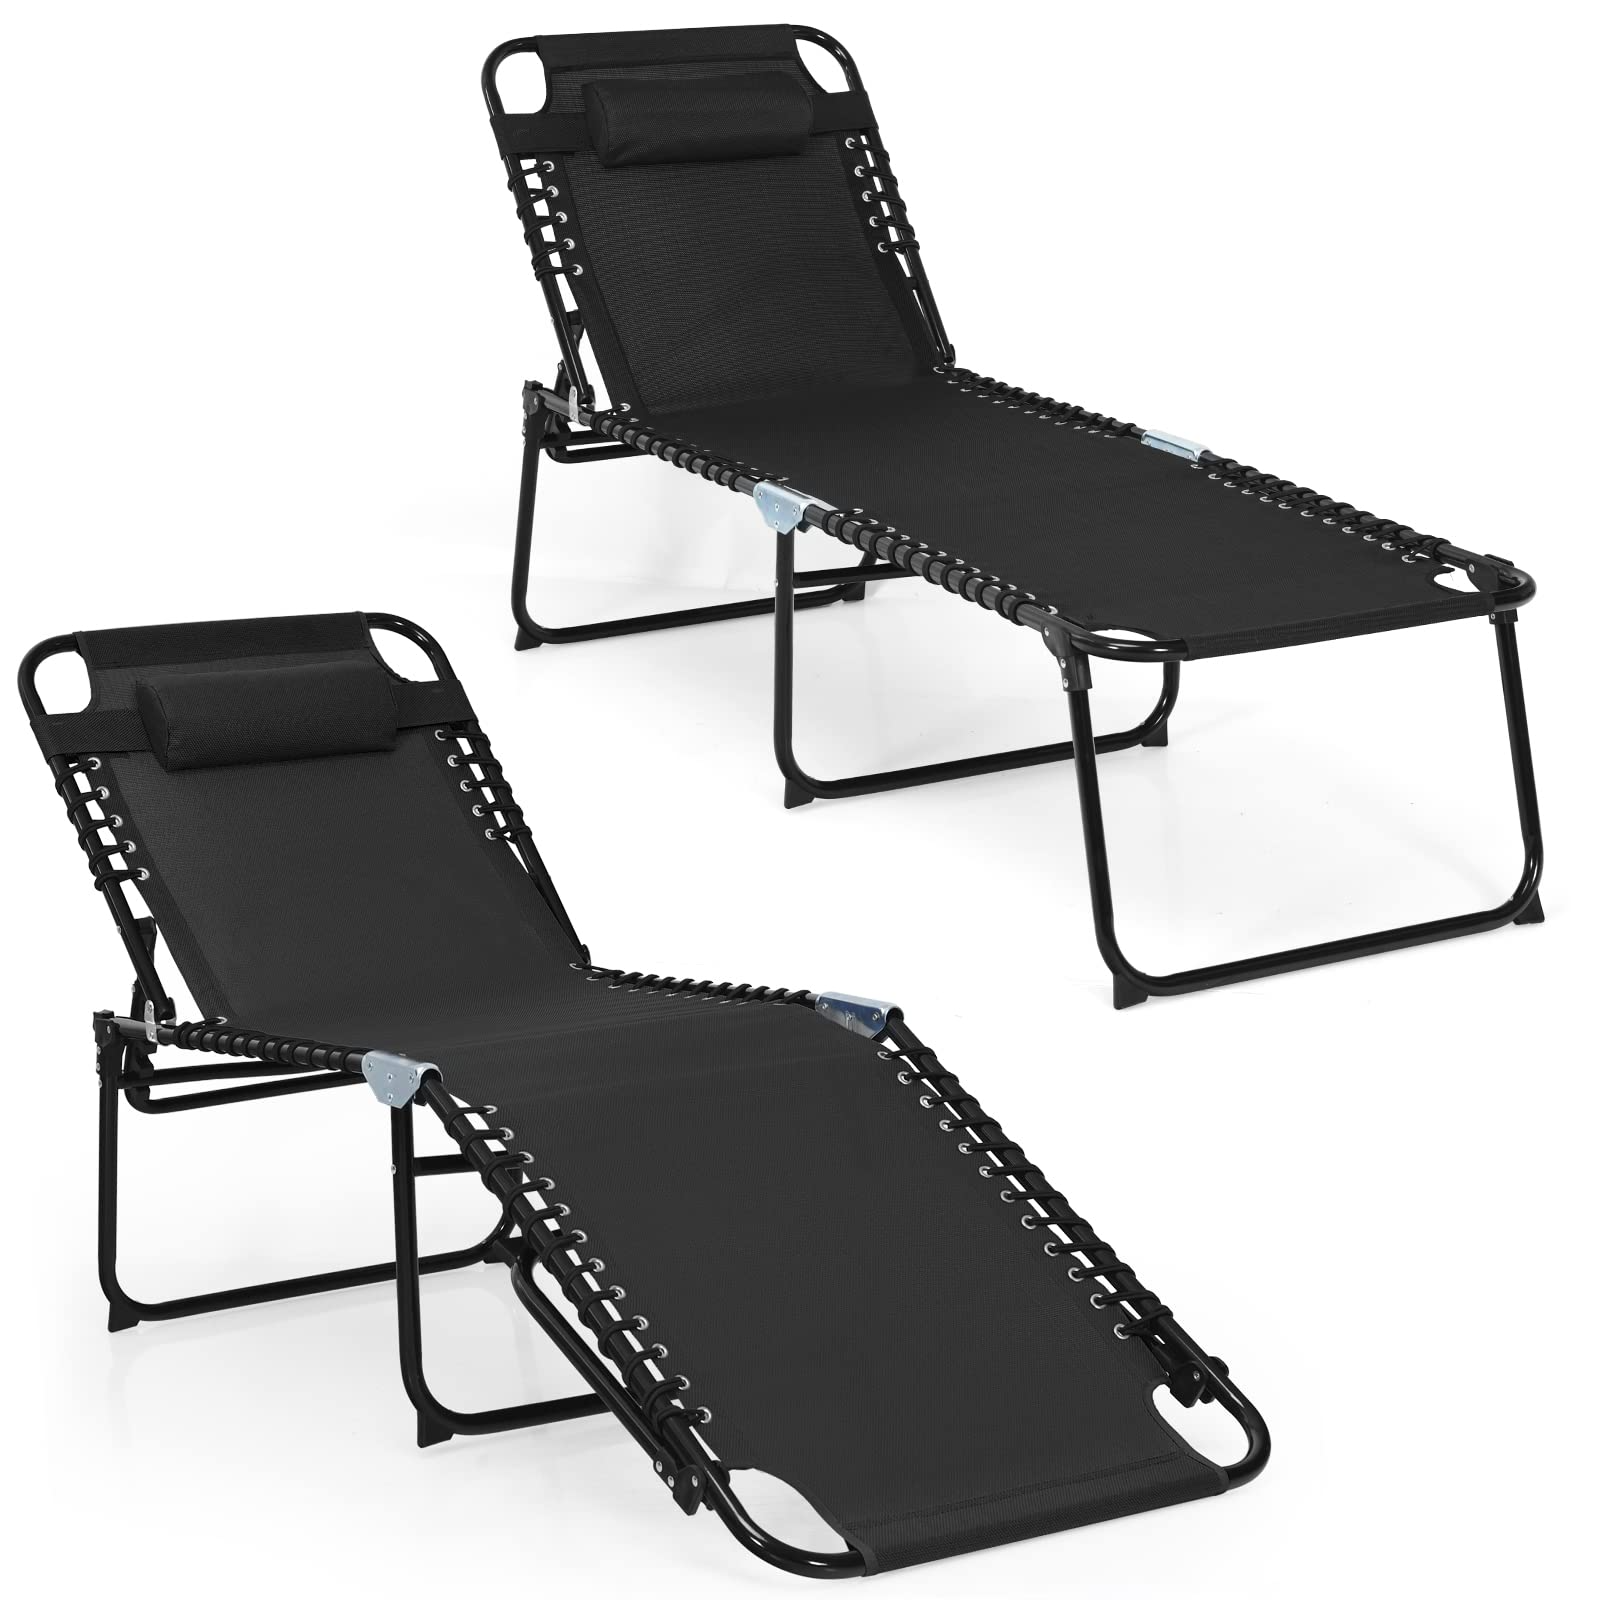 Outdoor Chaise Lounge Adjustable Sunbathing Seat W/Pillow